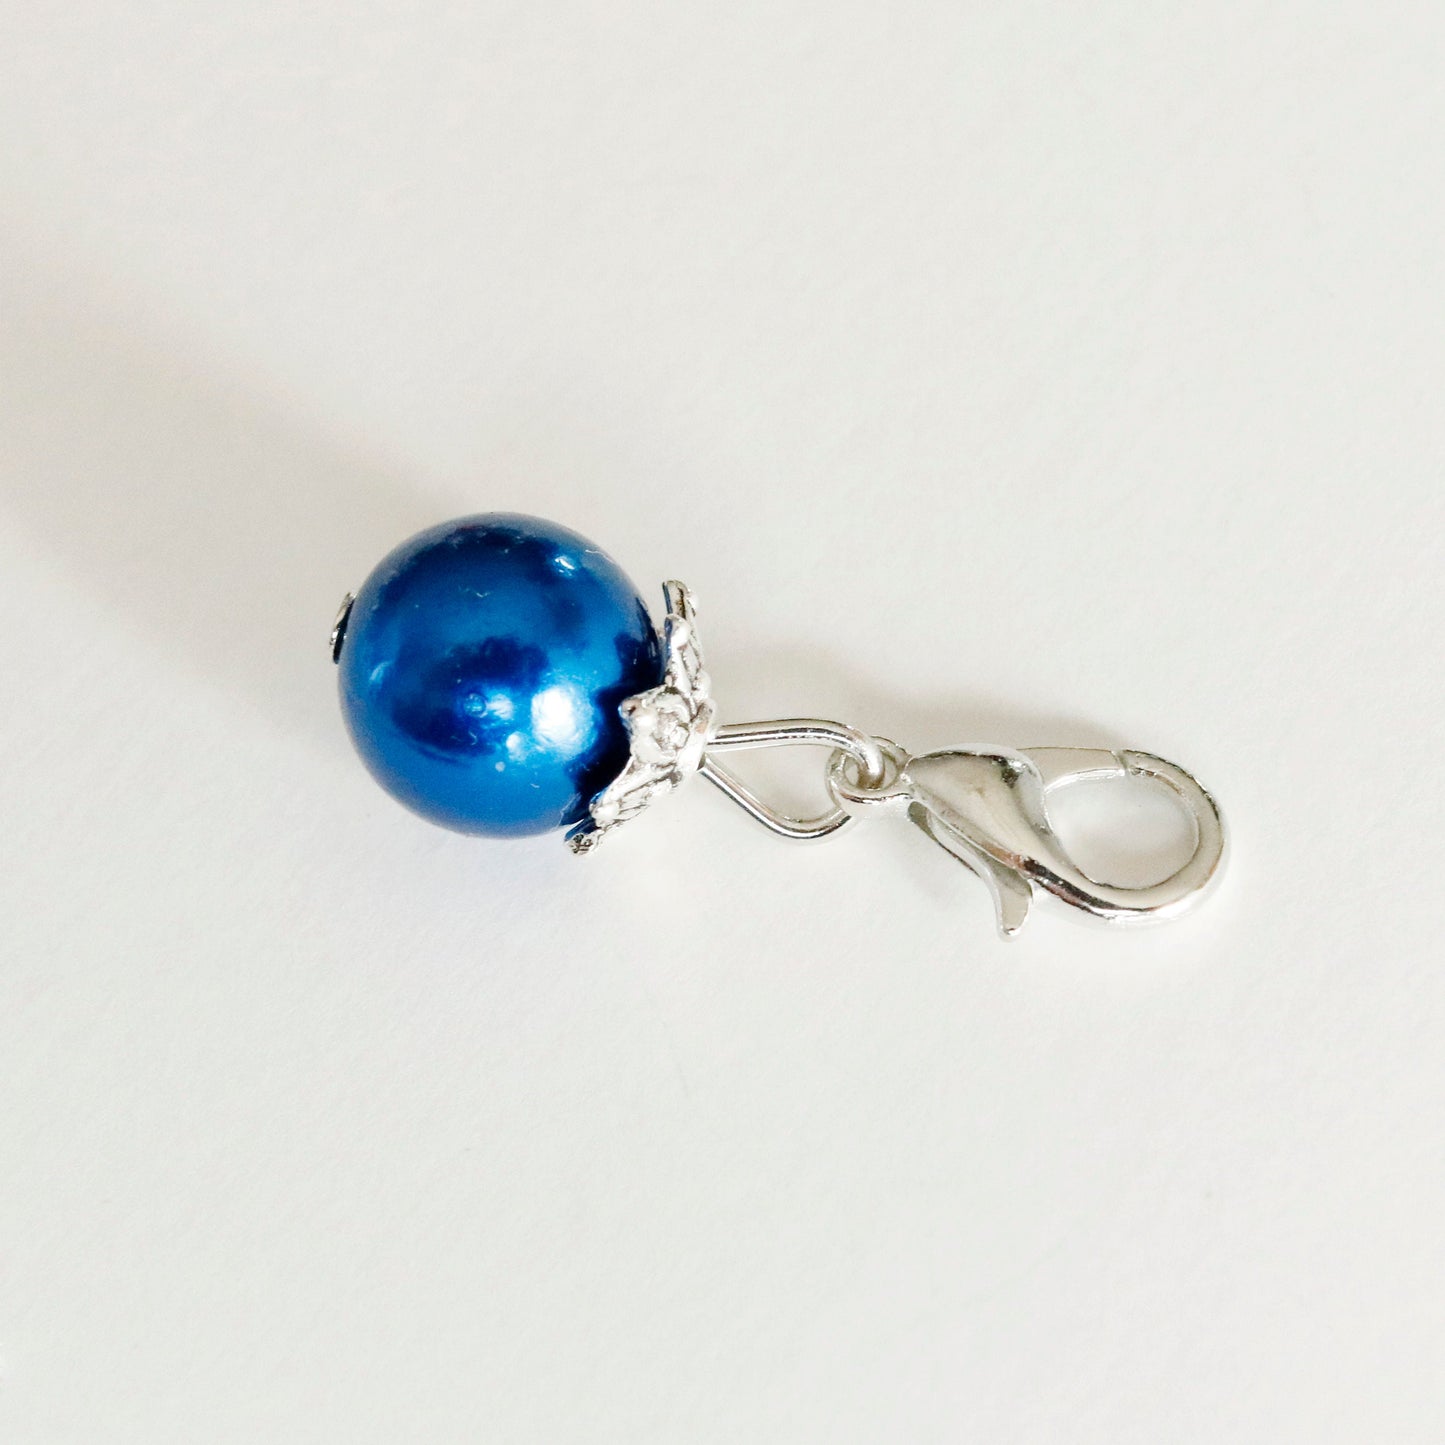 Colorful Pearl Charms | Red Pearl Clip | Yellow Pearl Charm | Blue Pearl Bookmark